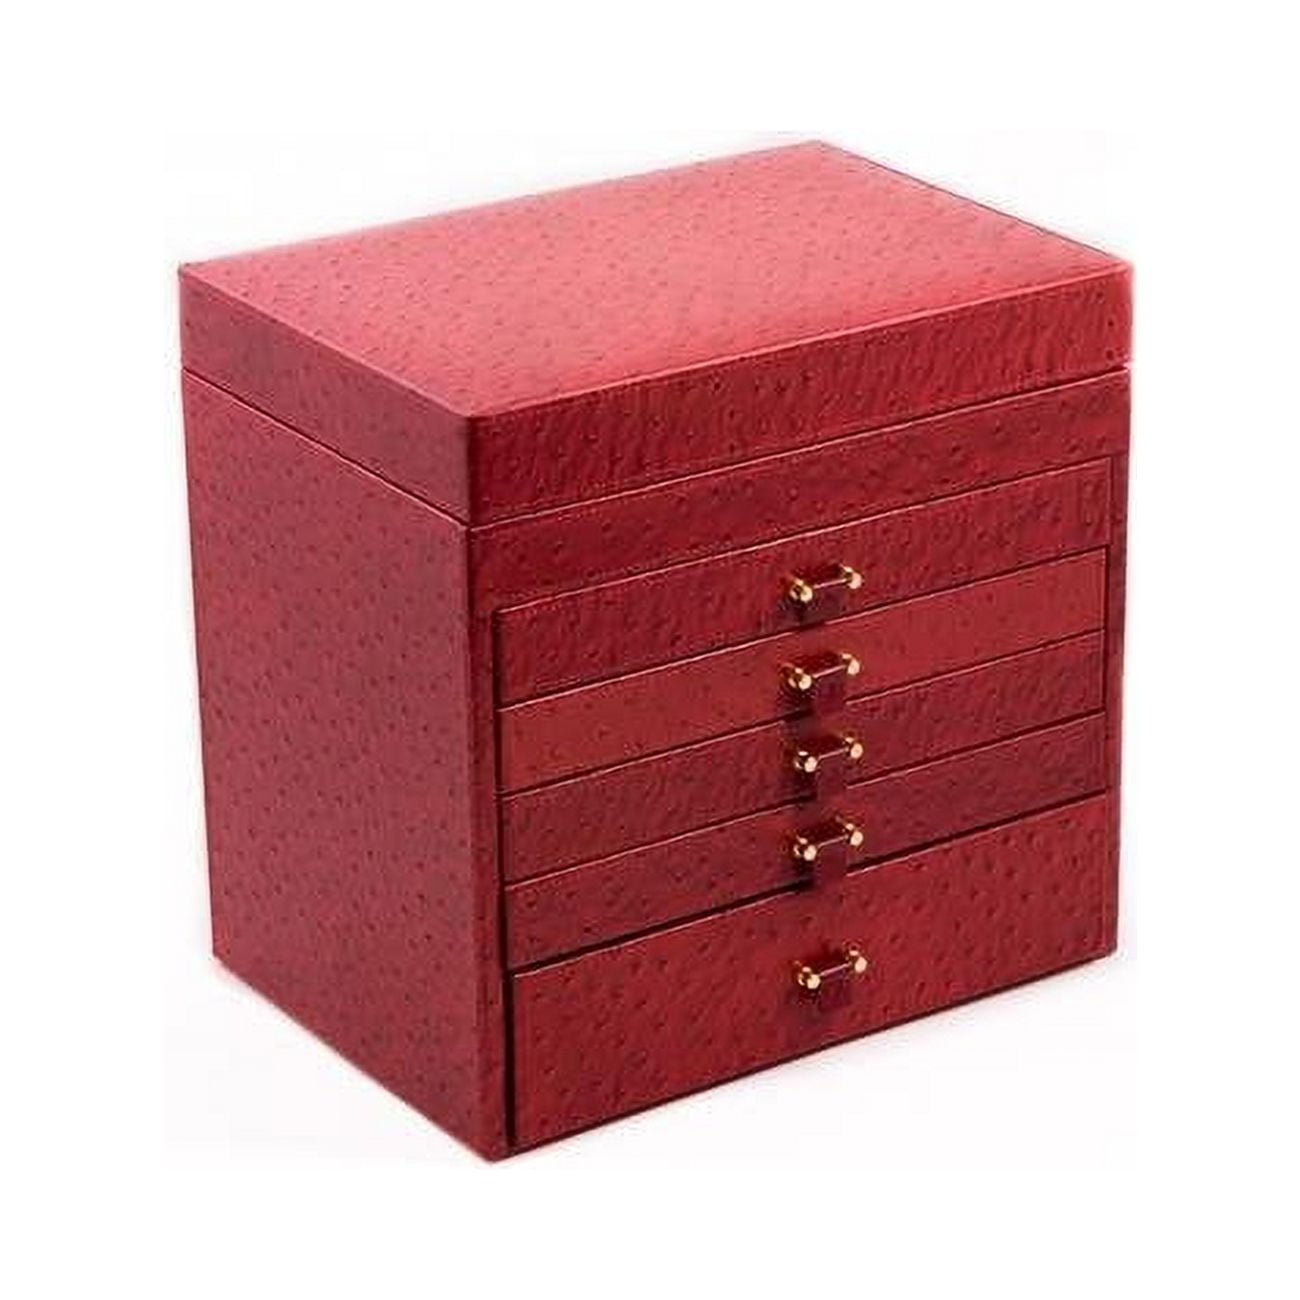 Bey-berk International Bb589red Red Ostrich Leather Jewelry Chest